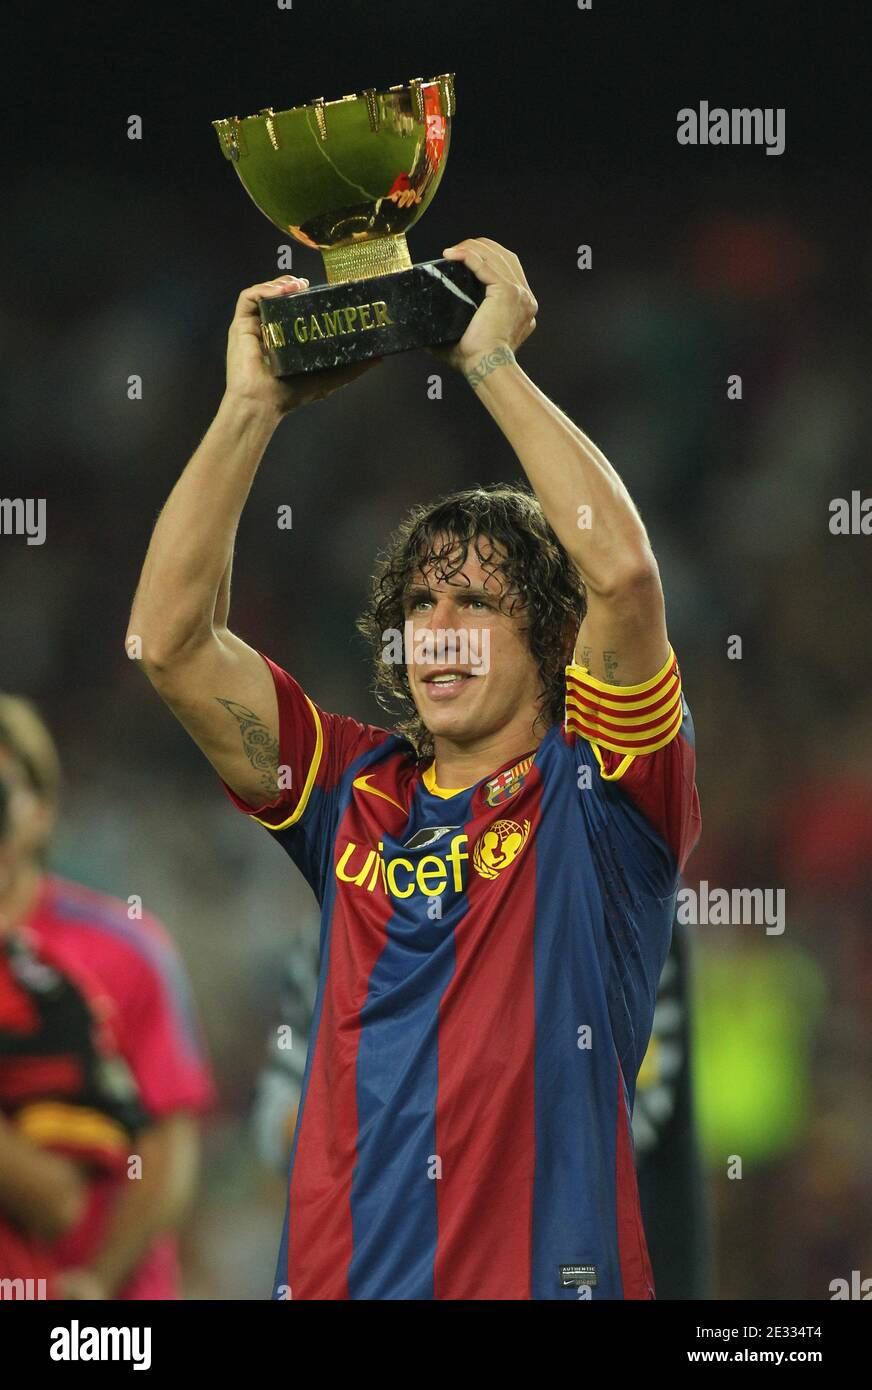 Barcelona's Carles Puyol is seen with the winner cup during the 45th Joan Gamper Trophy Soccer match, FC Barcelona vs AC Milan at Camp Nou in Barcelona, Spain, on August 25, 2010. Photo by Manuel Blondeau/ABACAPRESS.COM Stock Photo